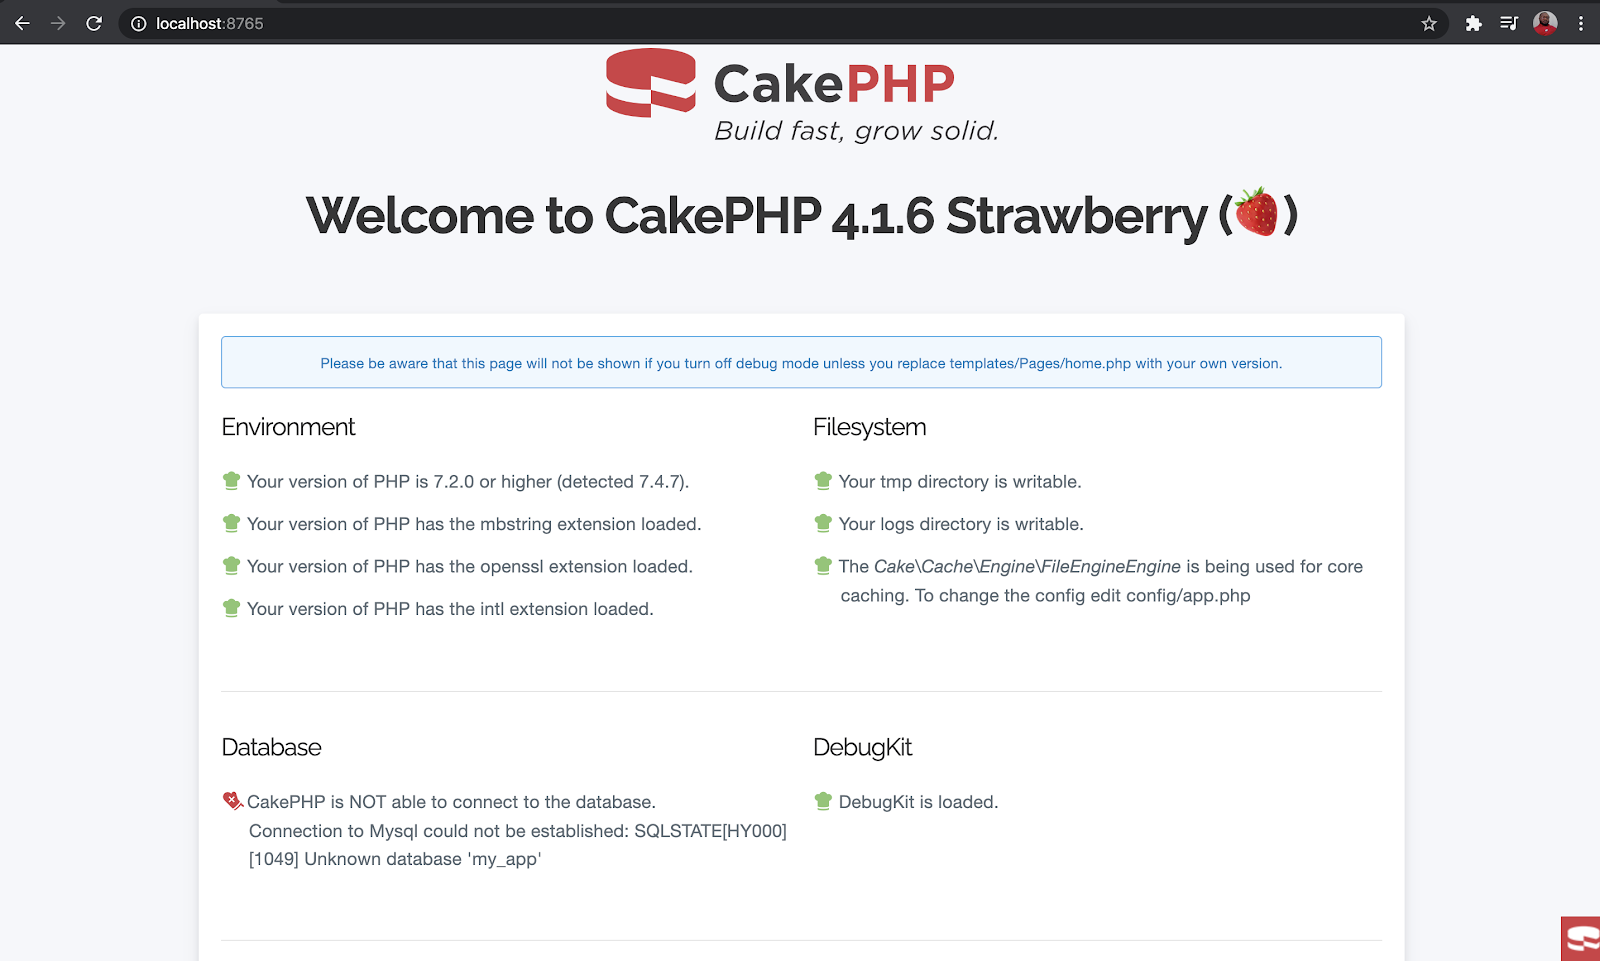 CakePHP welcome screen